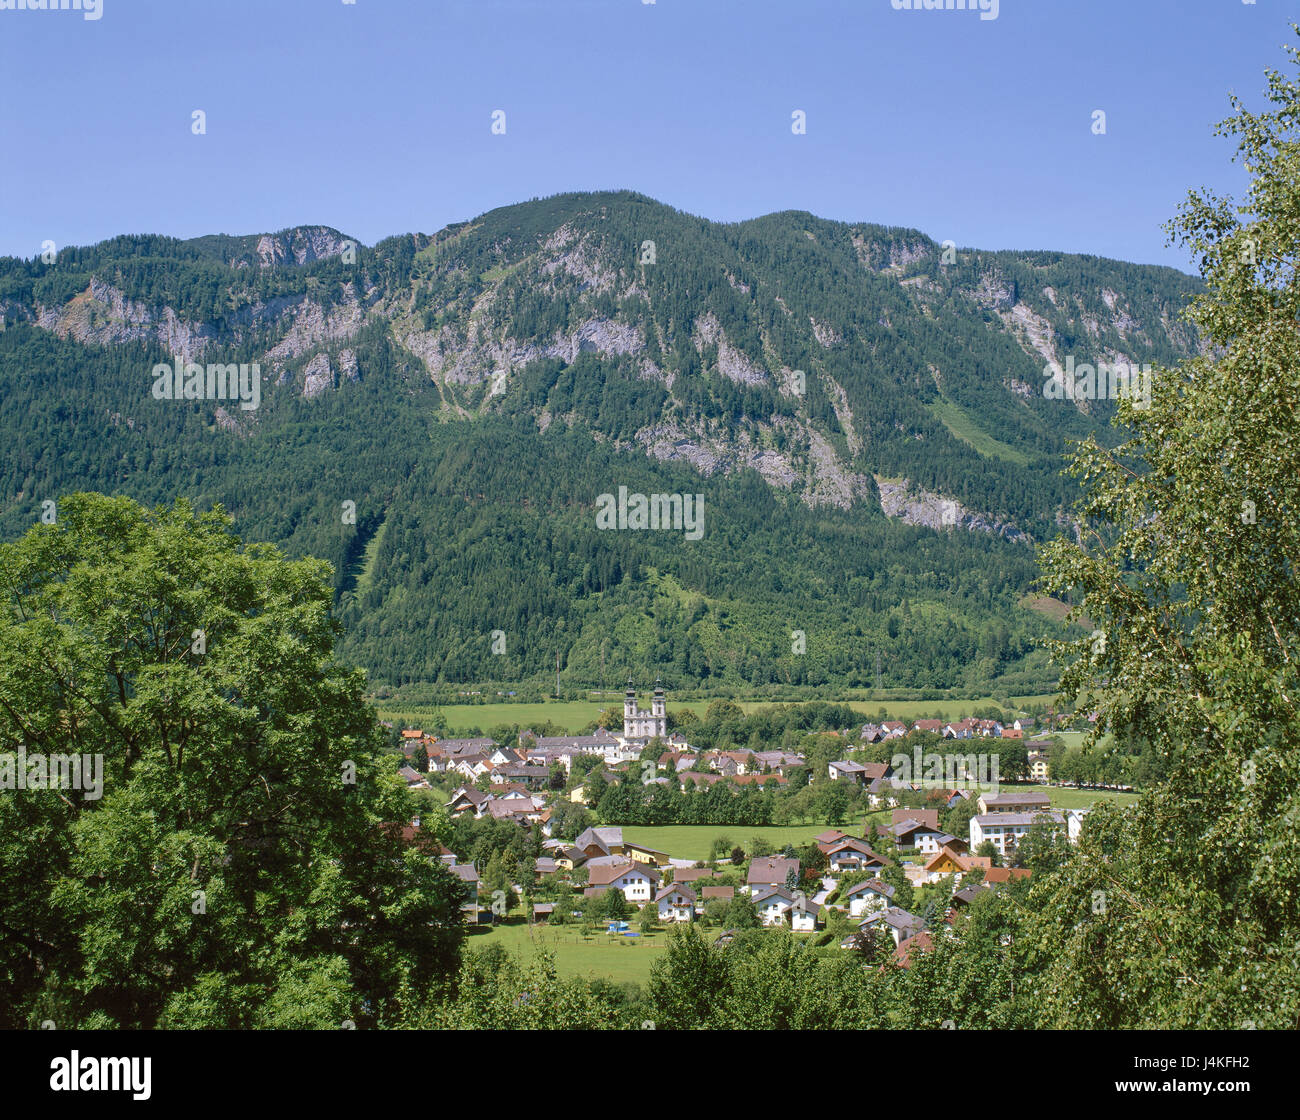 Austria, Eisenwurzen, hospital in the Phyrn, local view Europe, Upper Austria, foothills of the Alps, Pyhrn pen, hospital, church, cloister, minster, towers, steeples, background, mountains Stock Photo